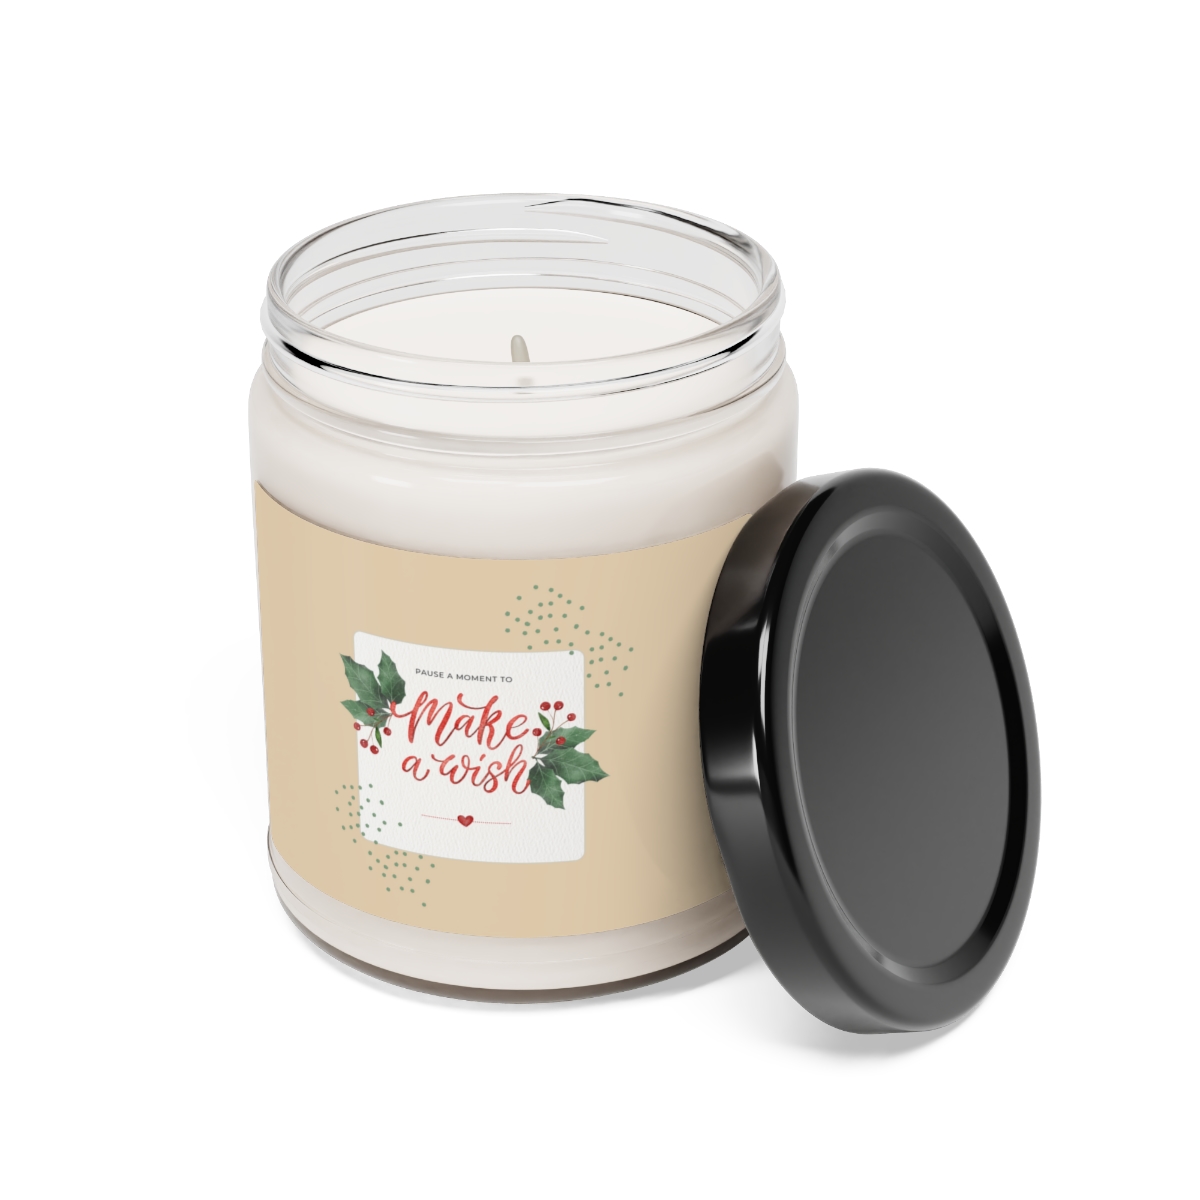 "make a wish" scented soy candle, 9oz